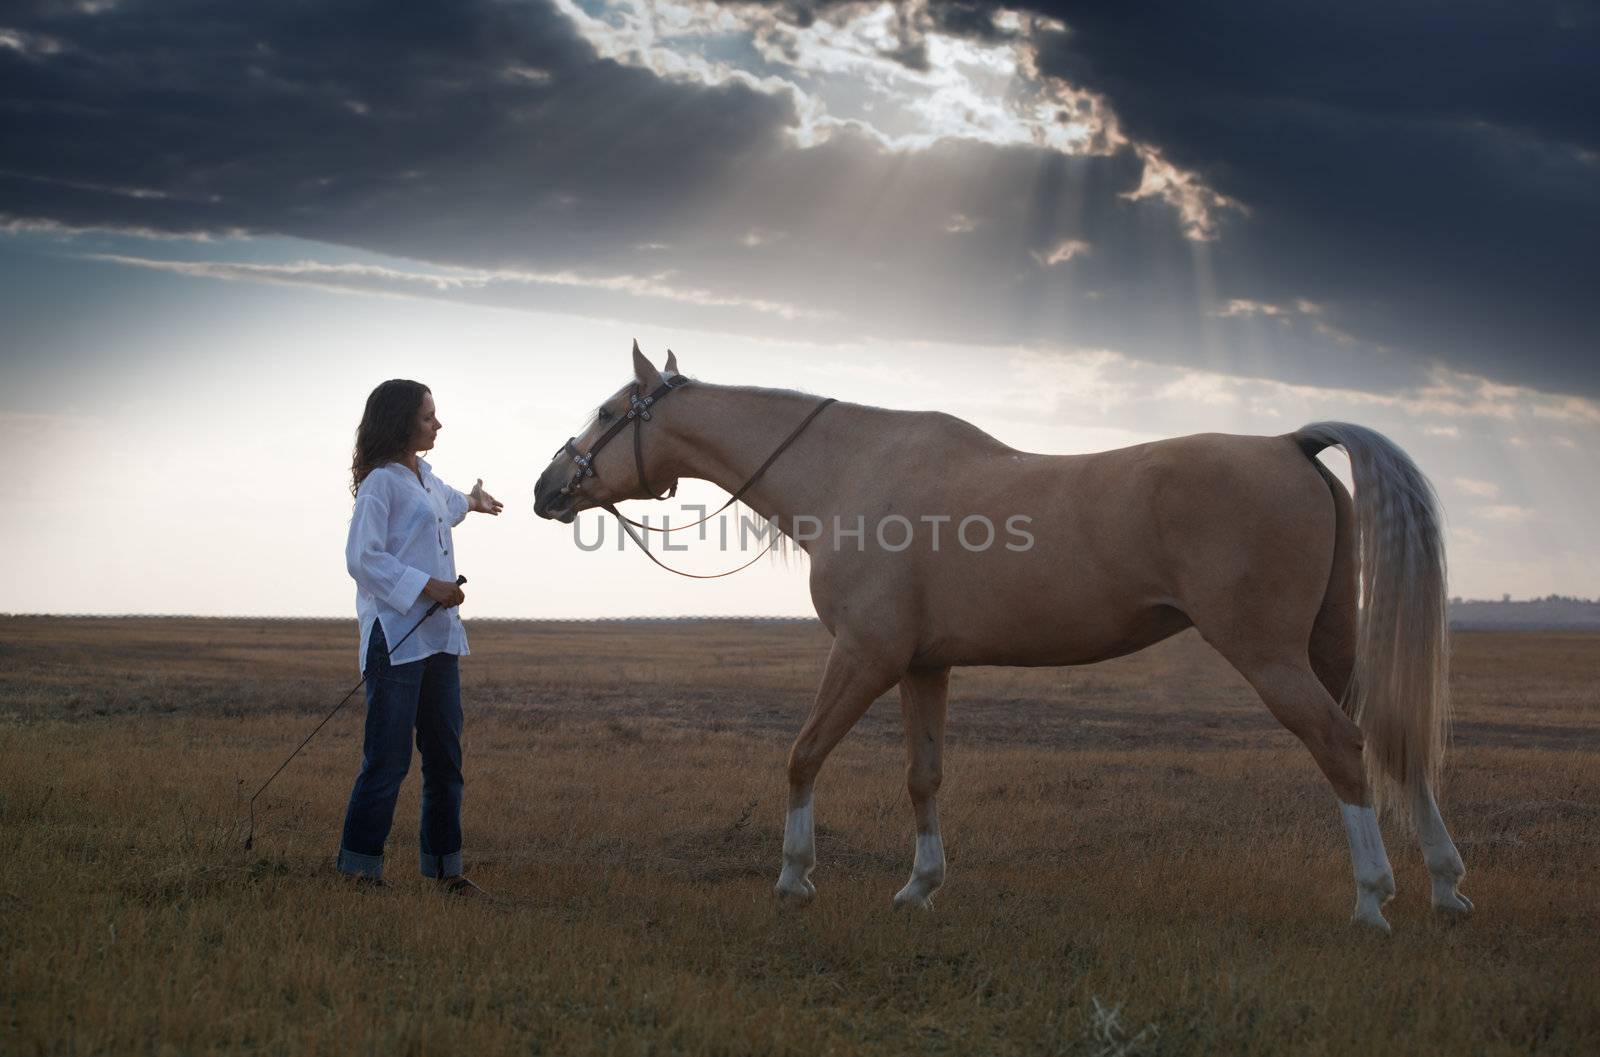 Woman training horse in the steppe during sunset